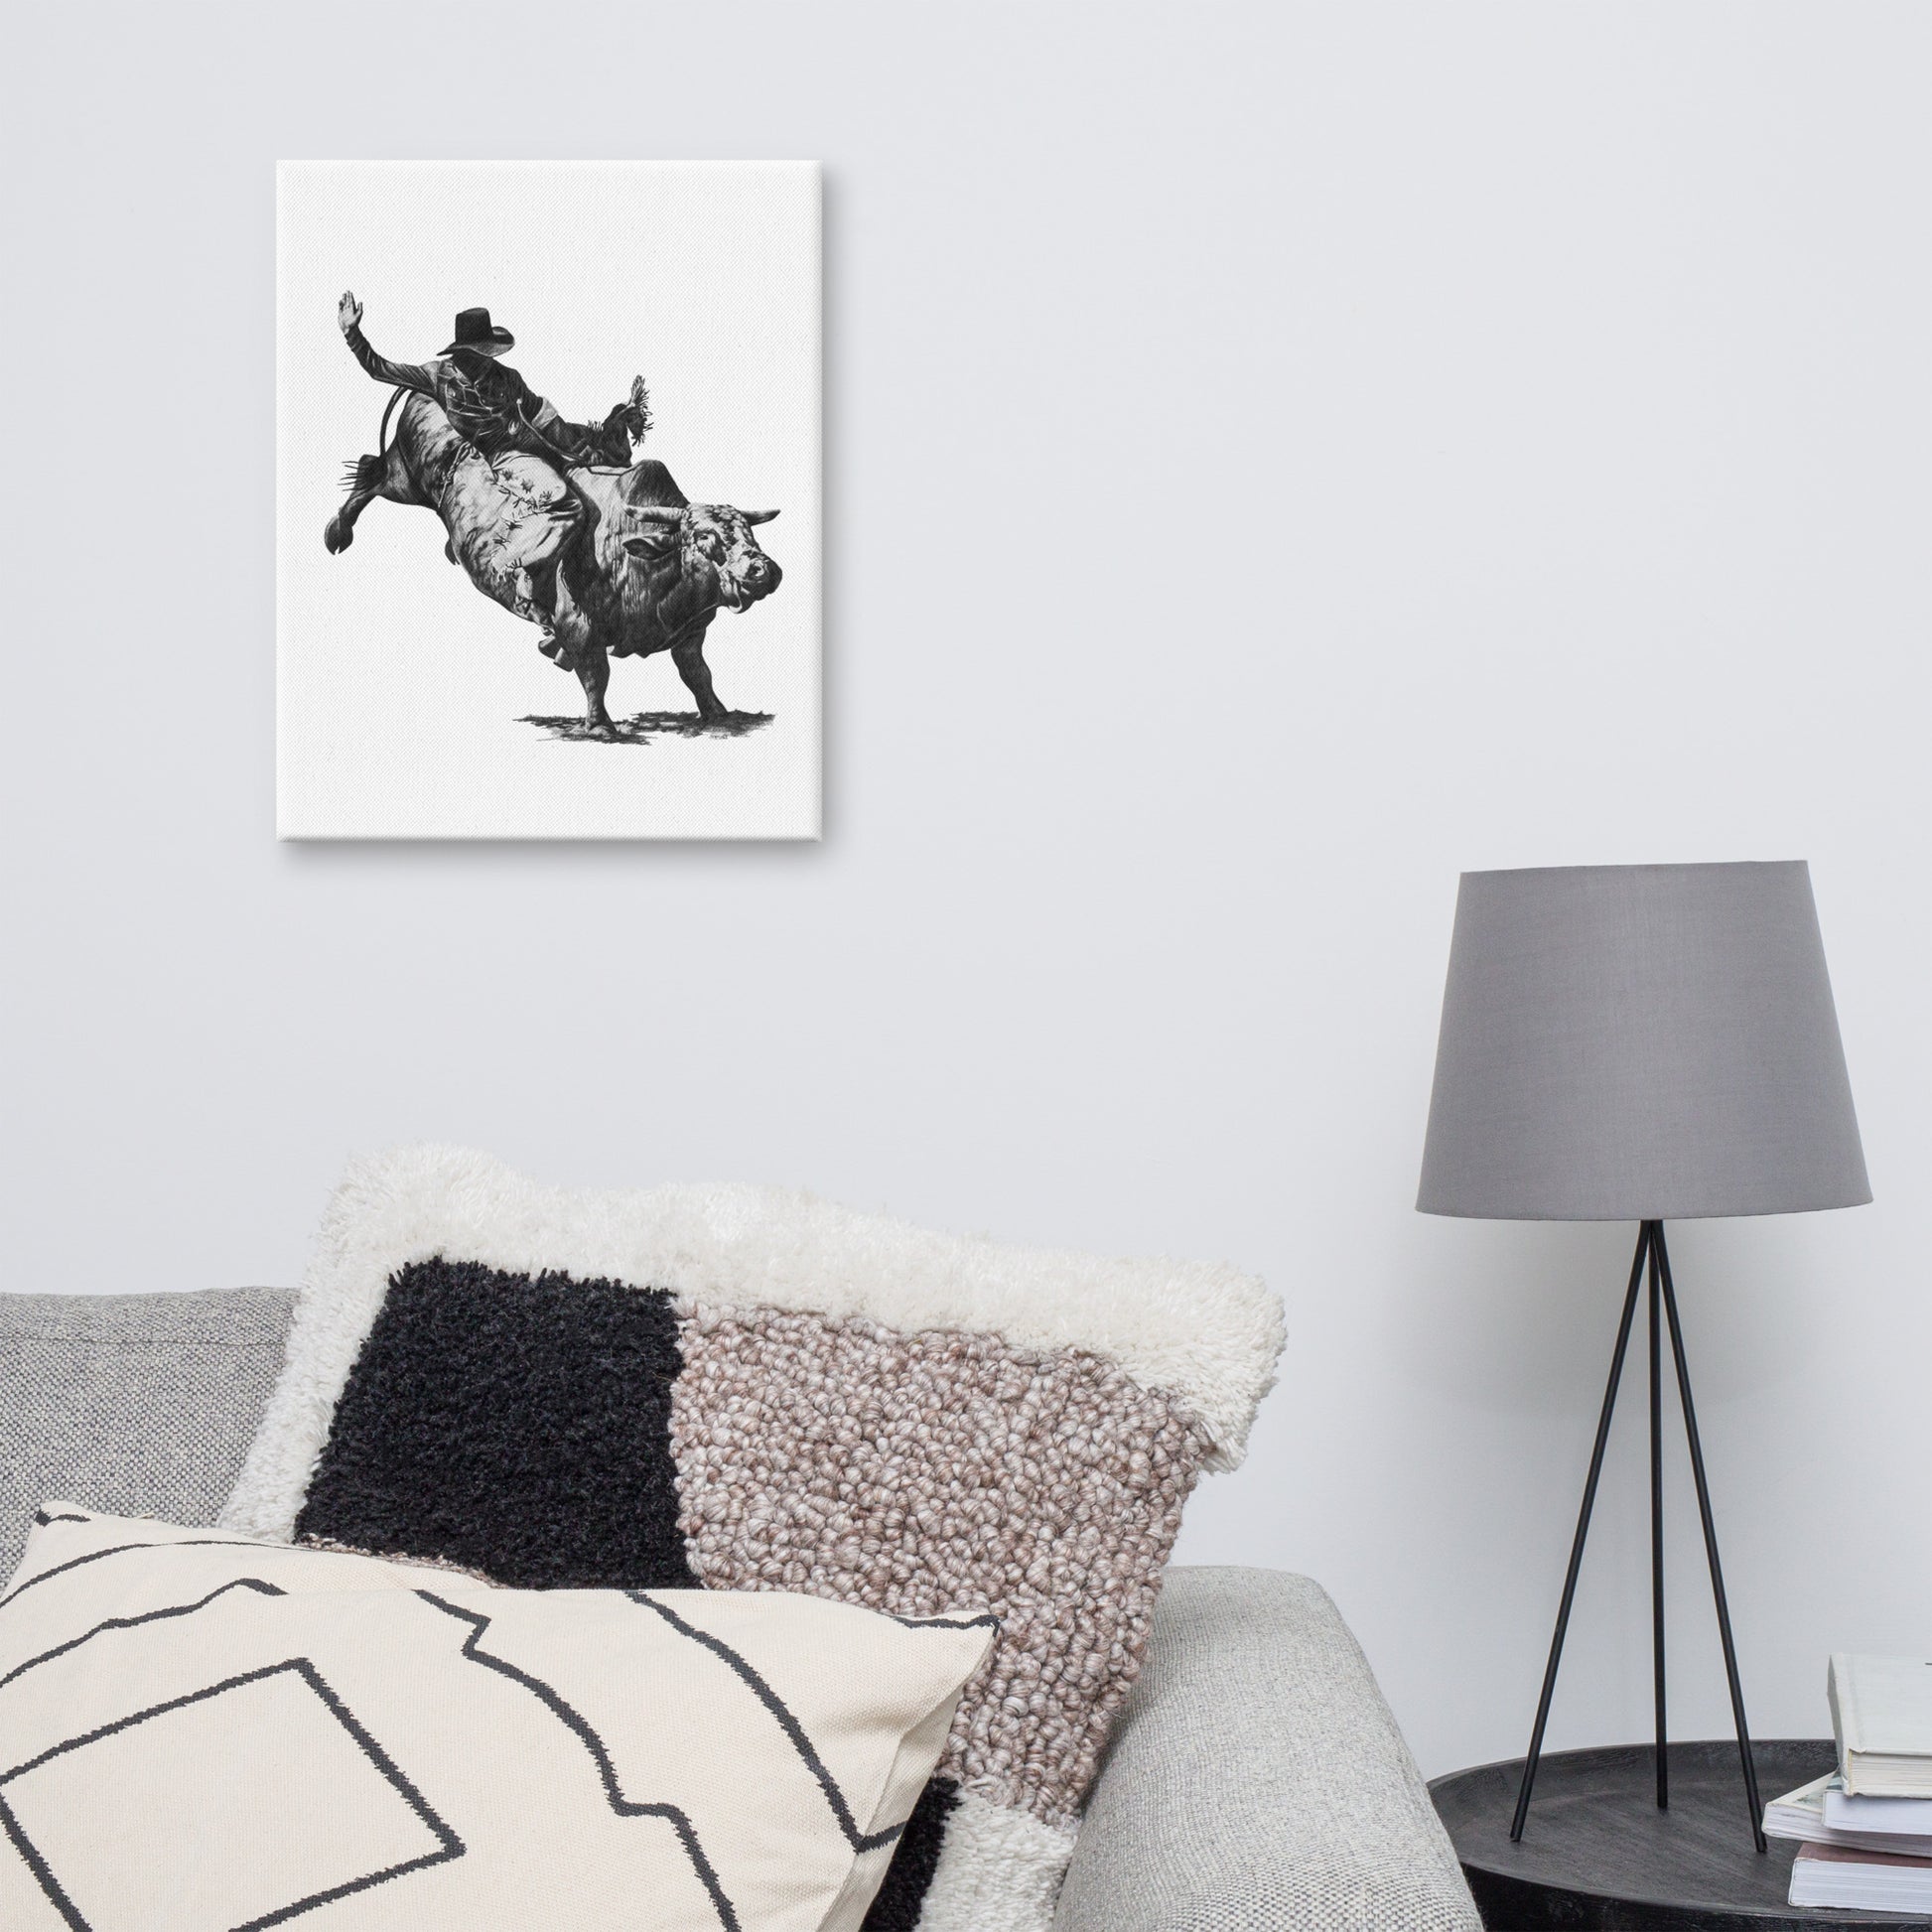 These "Bull Rider Canvas Wall Hangings" are from a drawing of mine created with a graphite pencil of a cowboy on a bucking bull. It has been digitally optimized and transferred to a poly-cotton blend canvas.